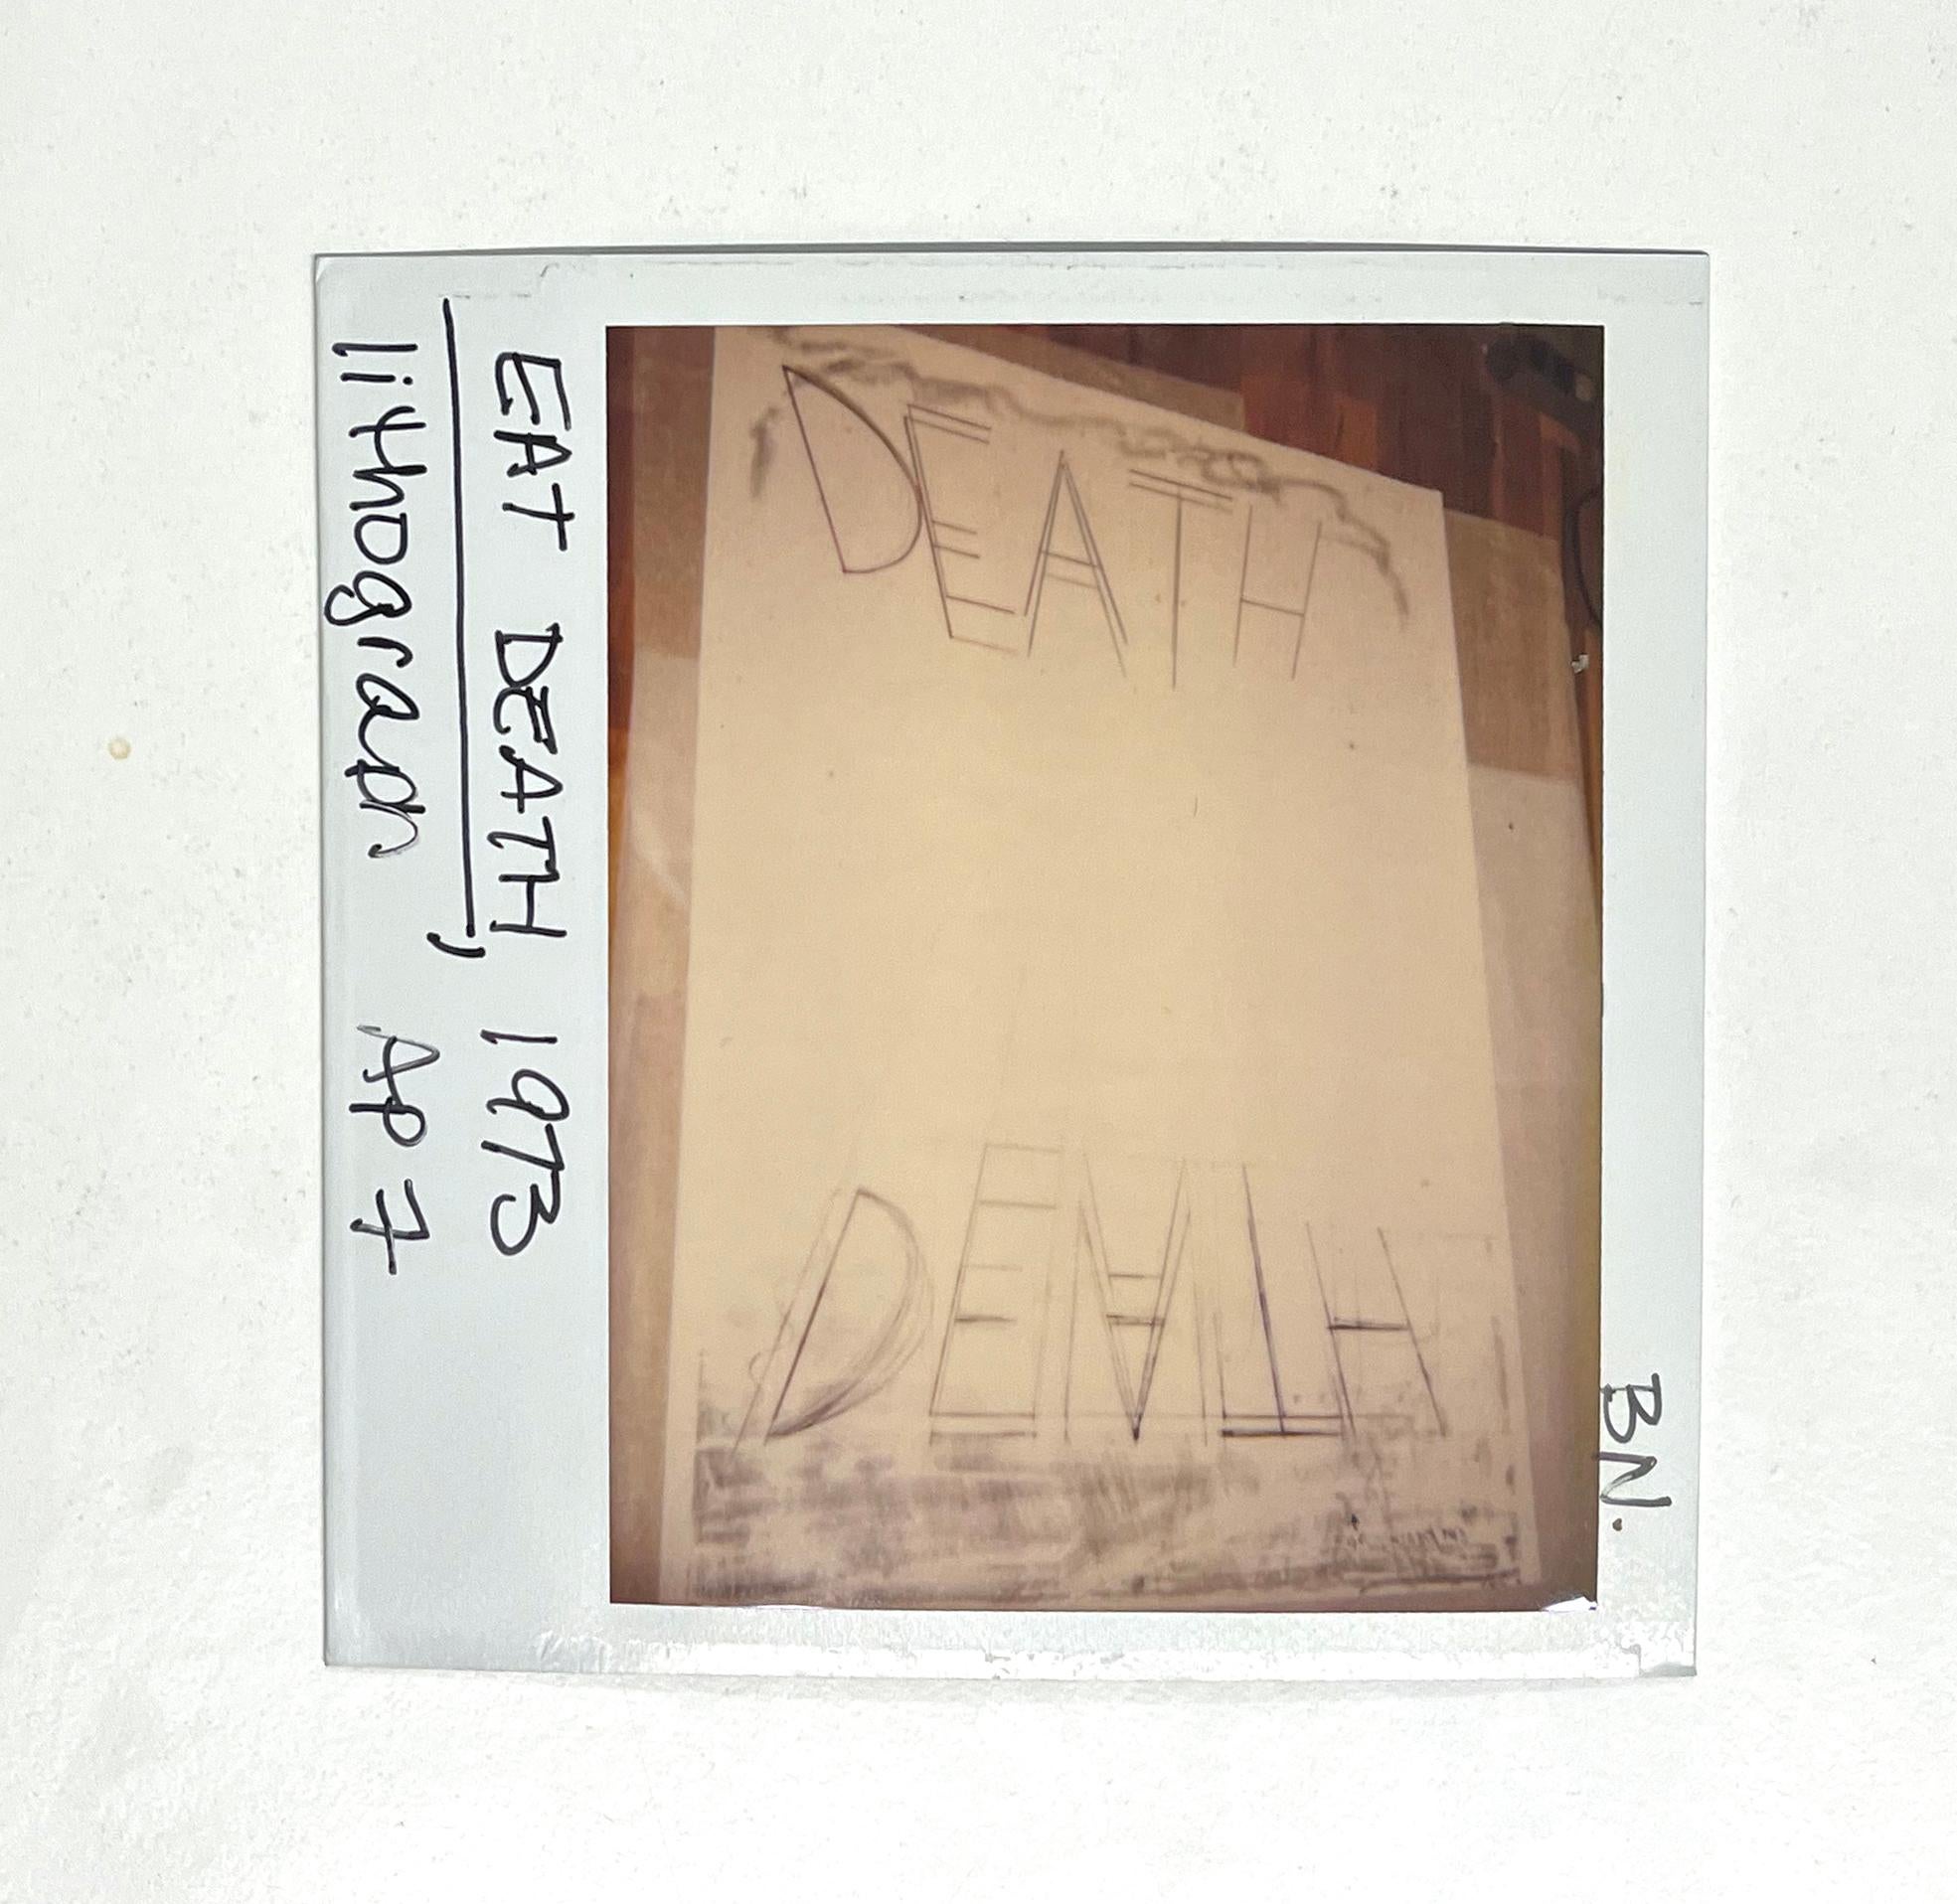 Unique, original Polaroid of Bruce Nauman "EAT DEATH", 1973 (Artist Proof 7) lithograph from the archive of Leo Castelli, NY; the photo is from the early 1980's when the gallery would document prints (silkscreens, lithographs) by taking a Polaroid